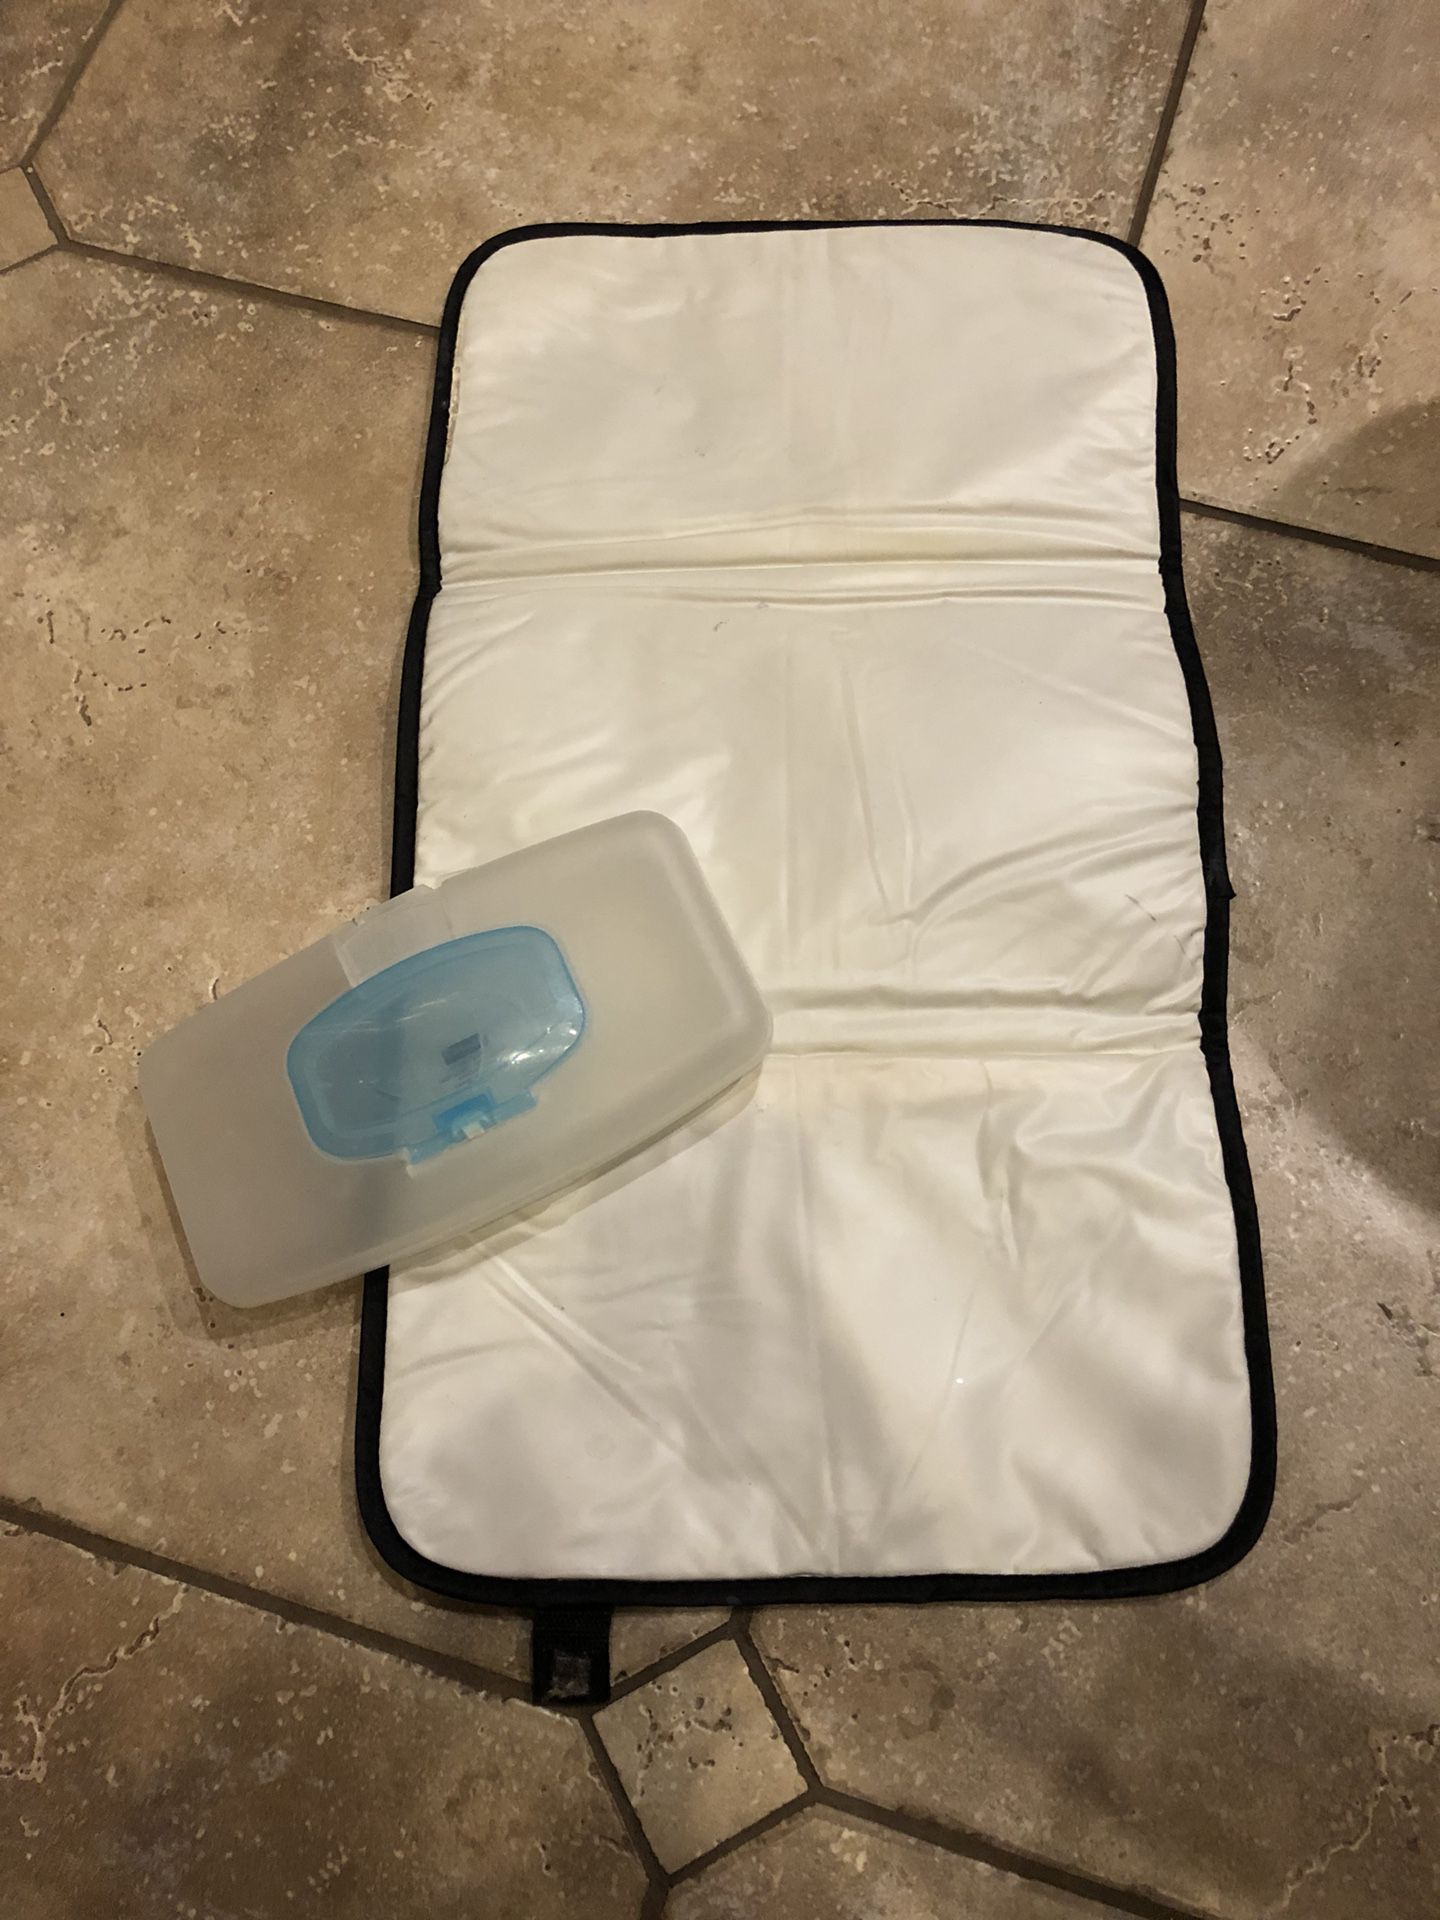 Changing pad and wipes holder - FREE!